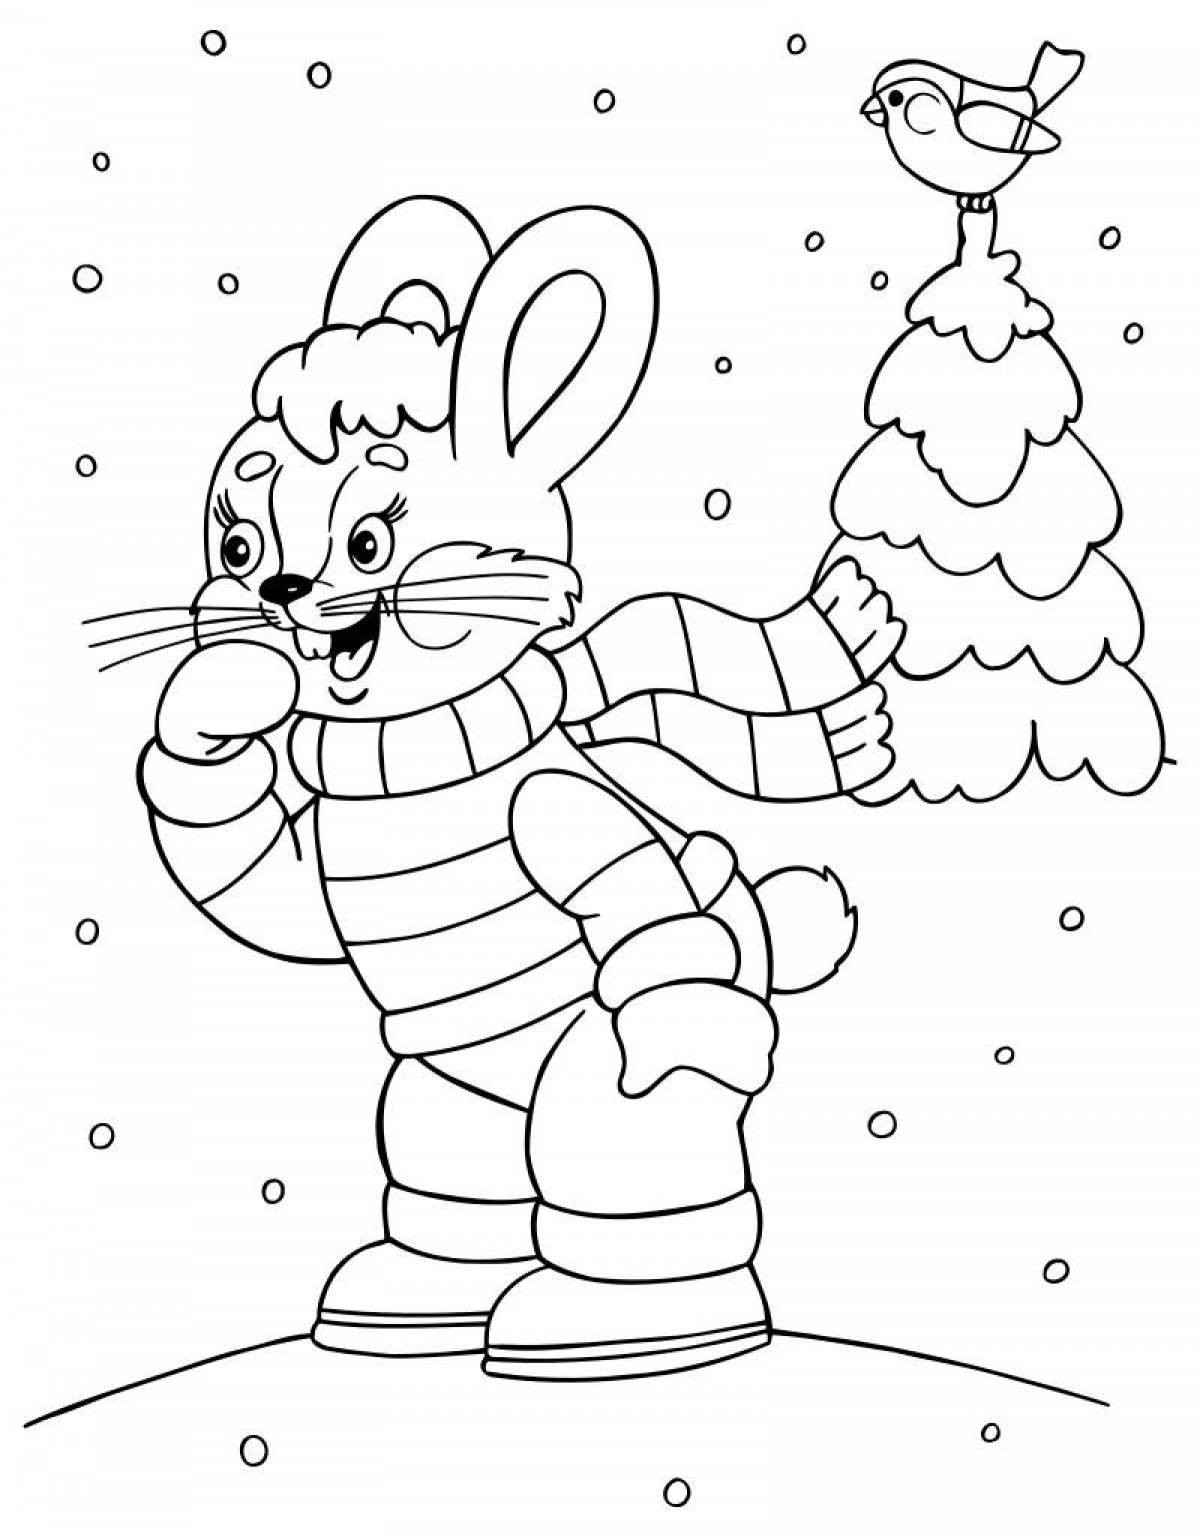 Coloring pages New Year's hare, painted with paints